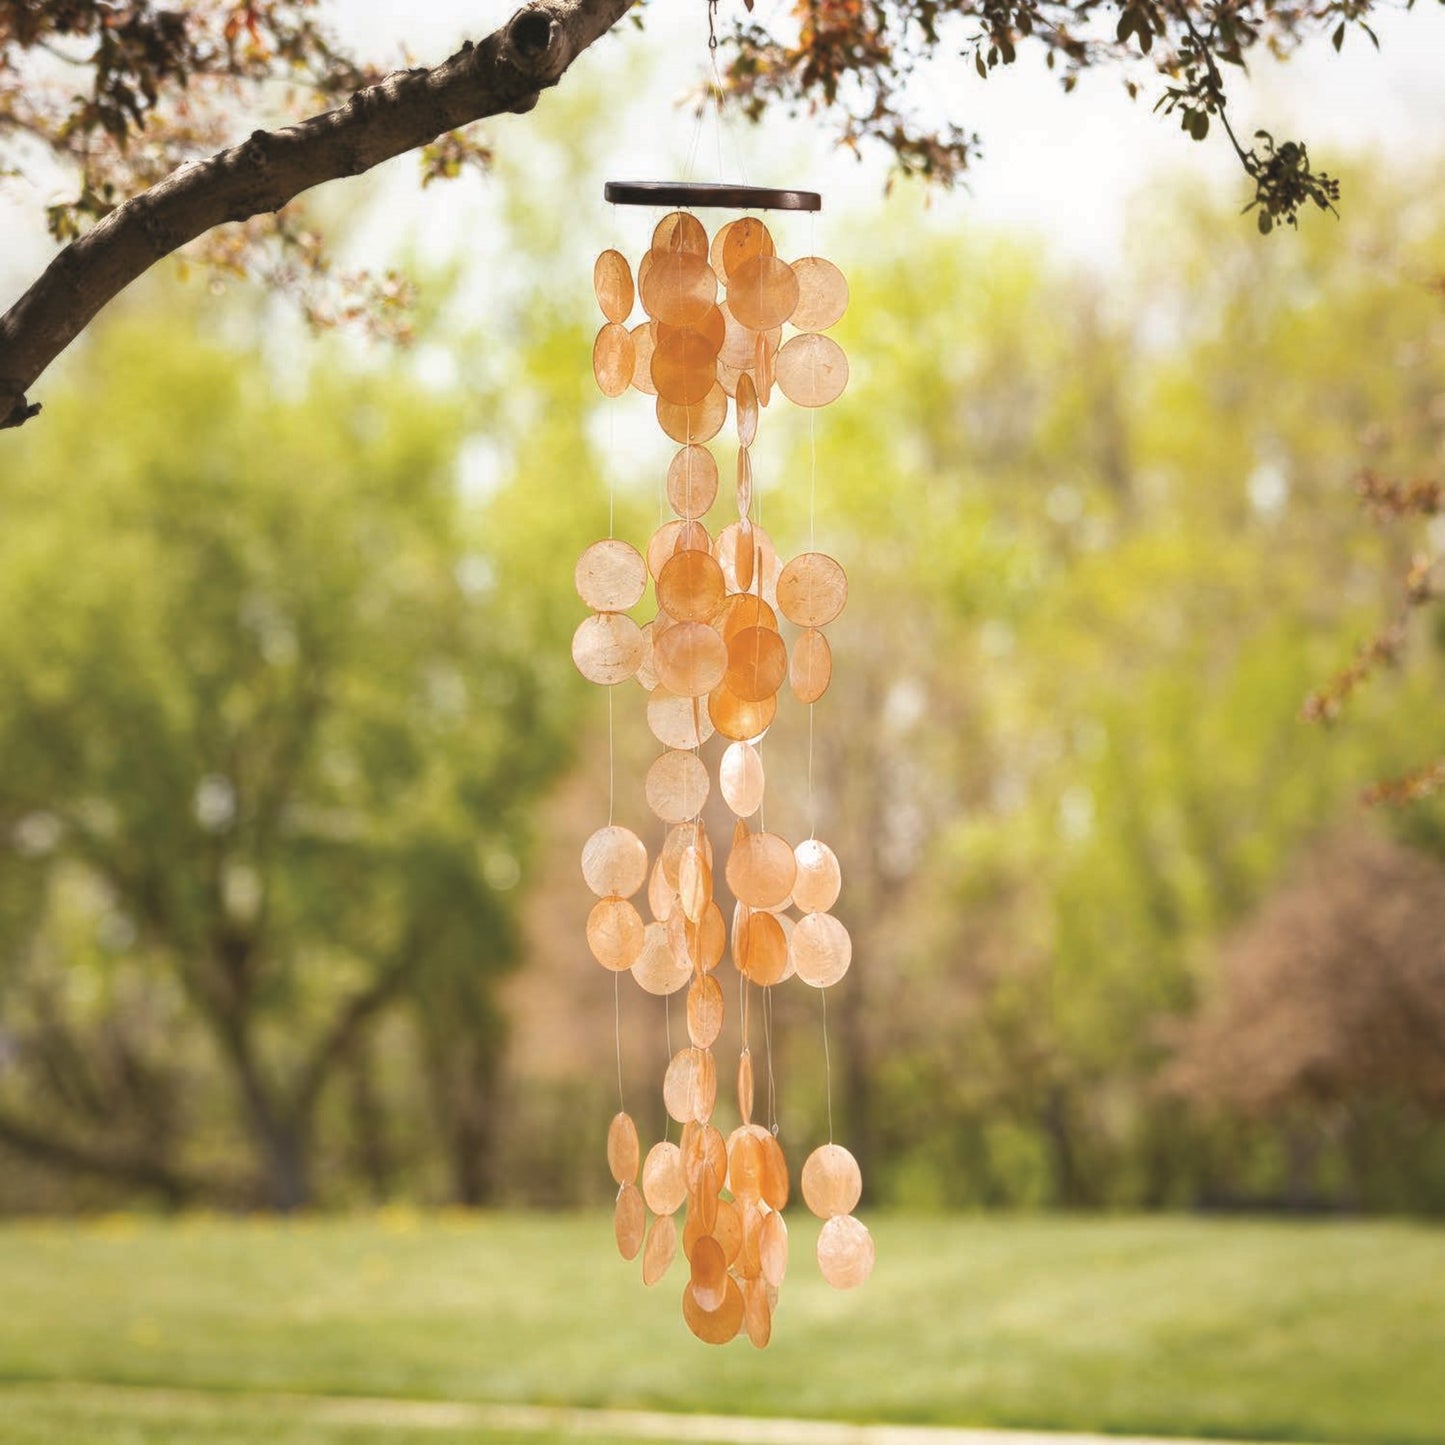 40" Capiz Shell Waterfall Wind Chime by Woodstock | Patio Decor | Gifts for Mom | Housewarming Gifts